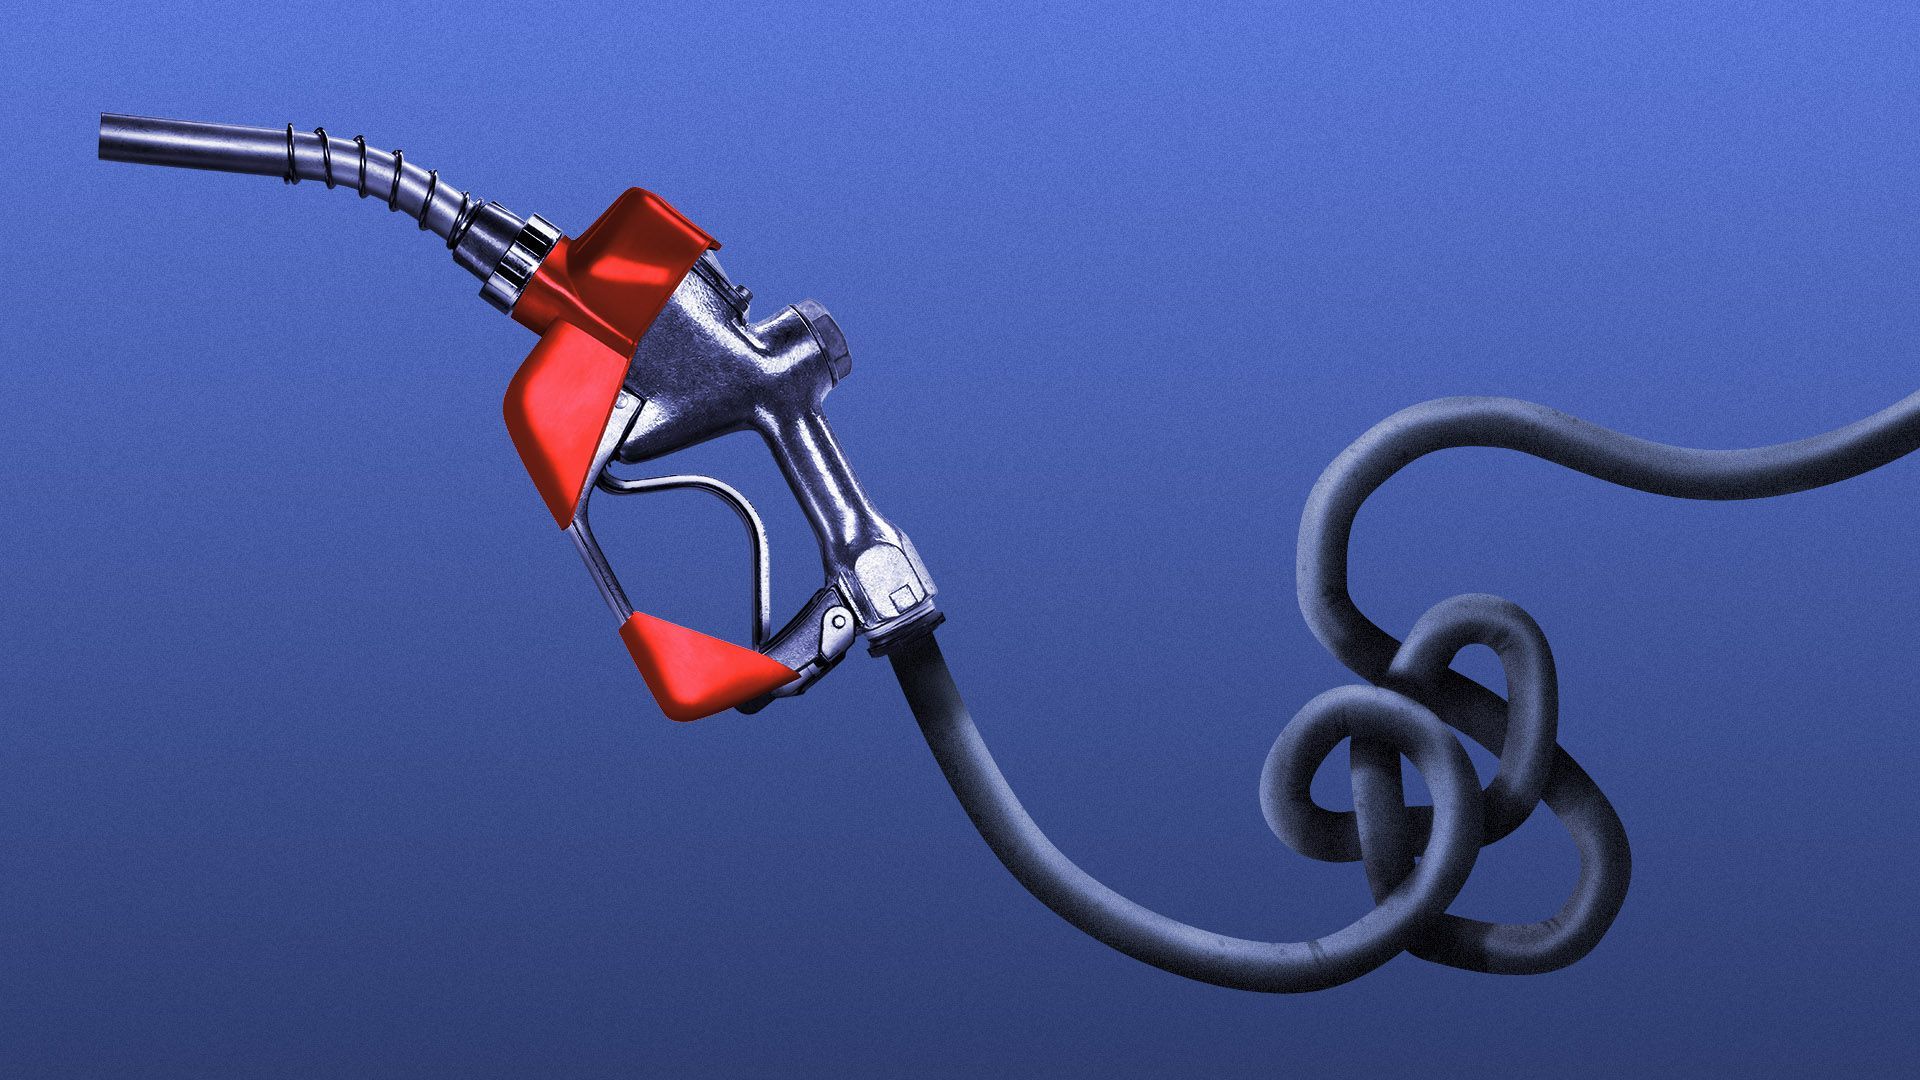 Illustration of a gas pump with a knot in the hose